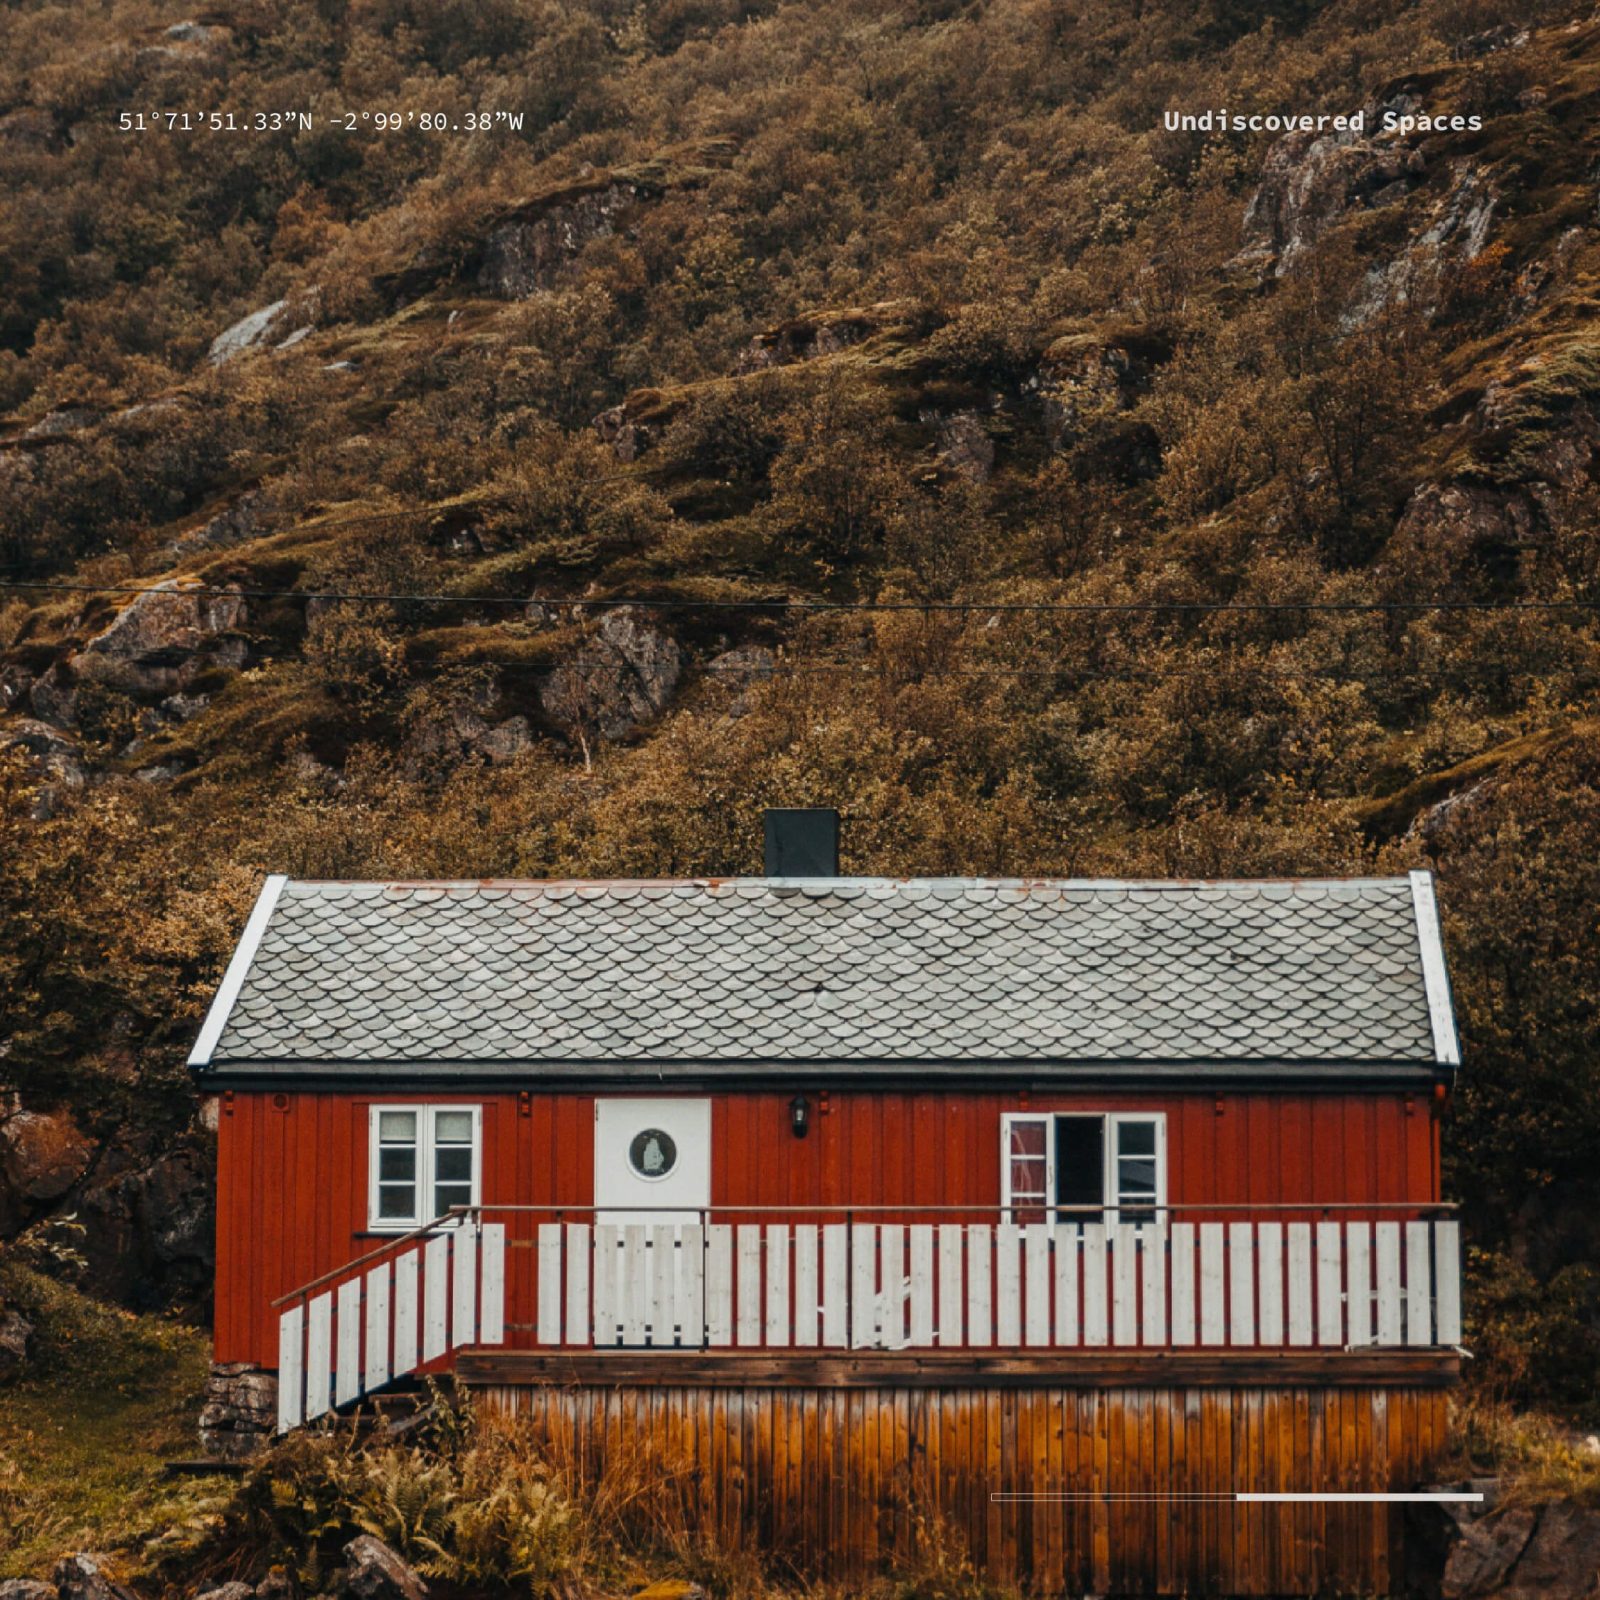 A small red cabin with a white trim and a black roof is nestled against a rugged, rocky hillside covered with sparse green vegetation. Mist hovers around the landscape, enhancing its natural appeal much like